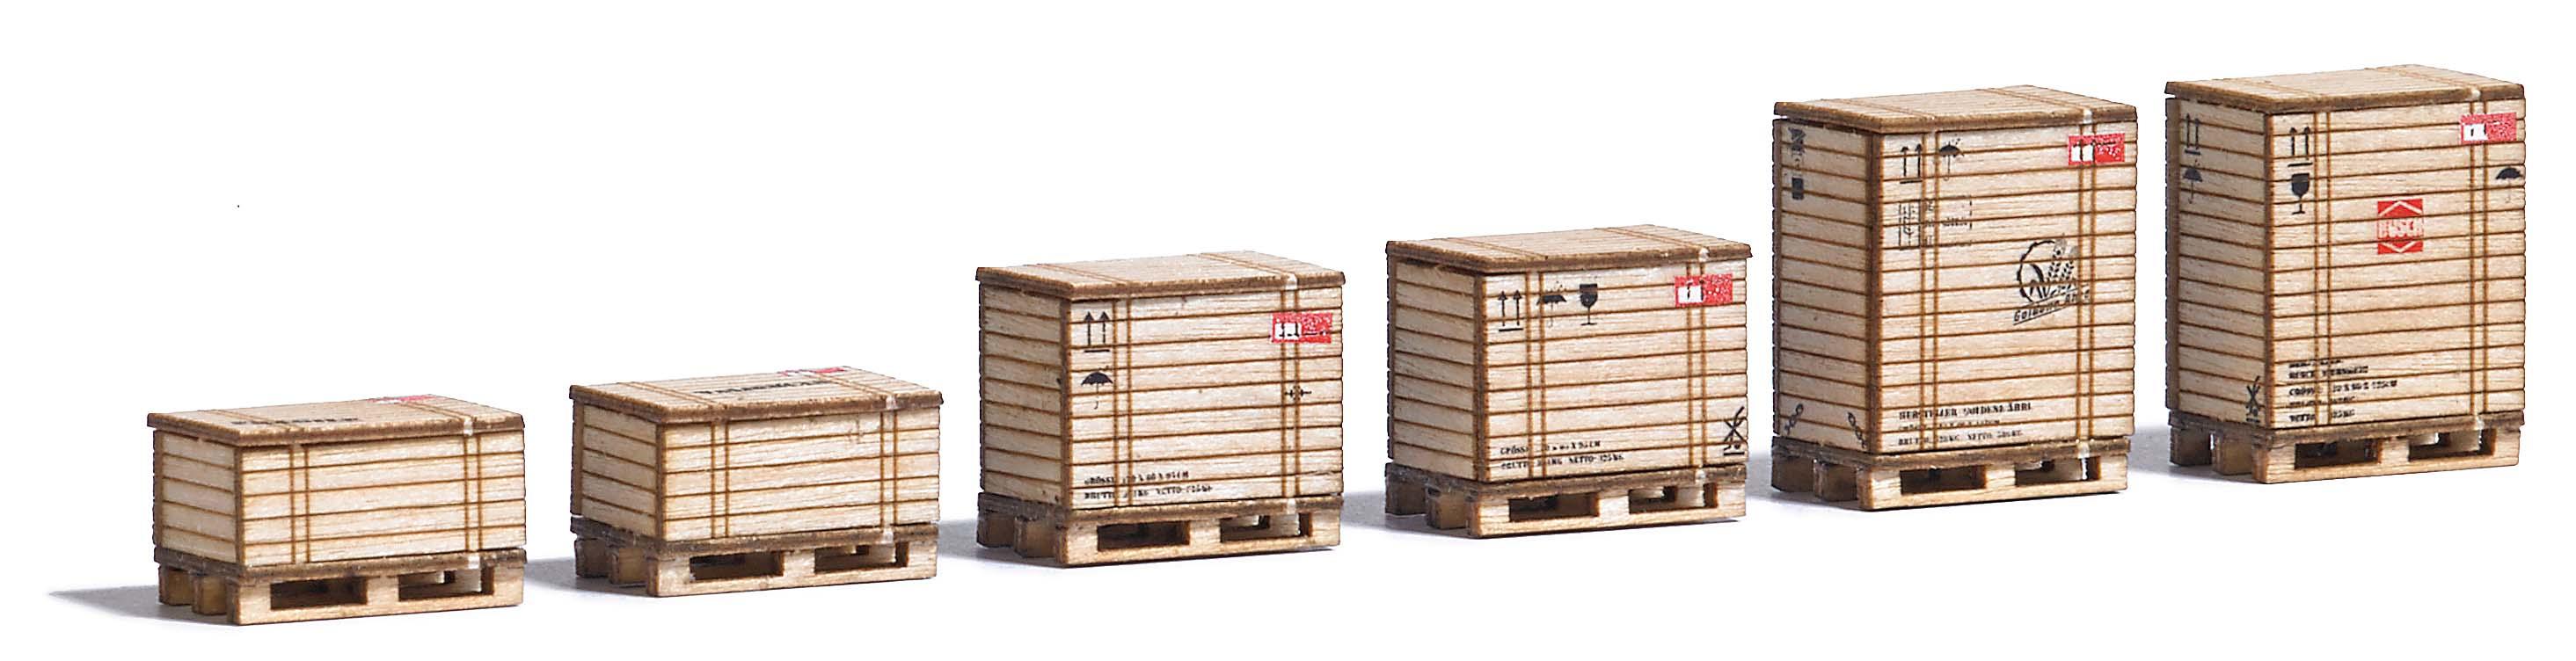 Busch 1811 6 Pallets & 6 Crates made of real wood